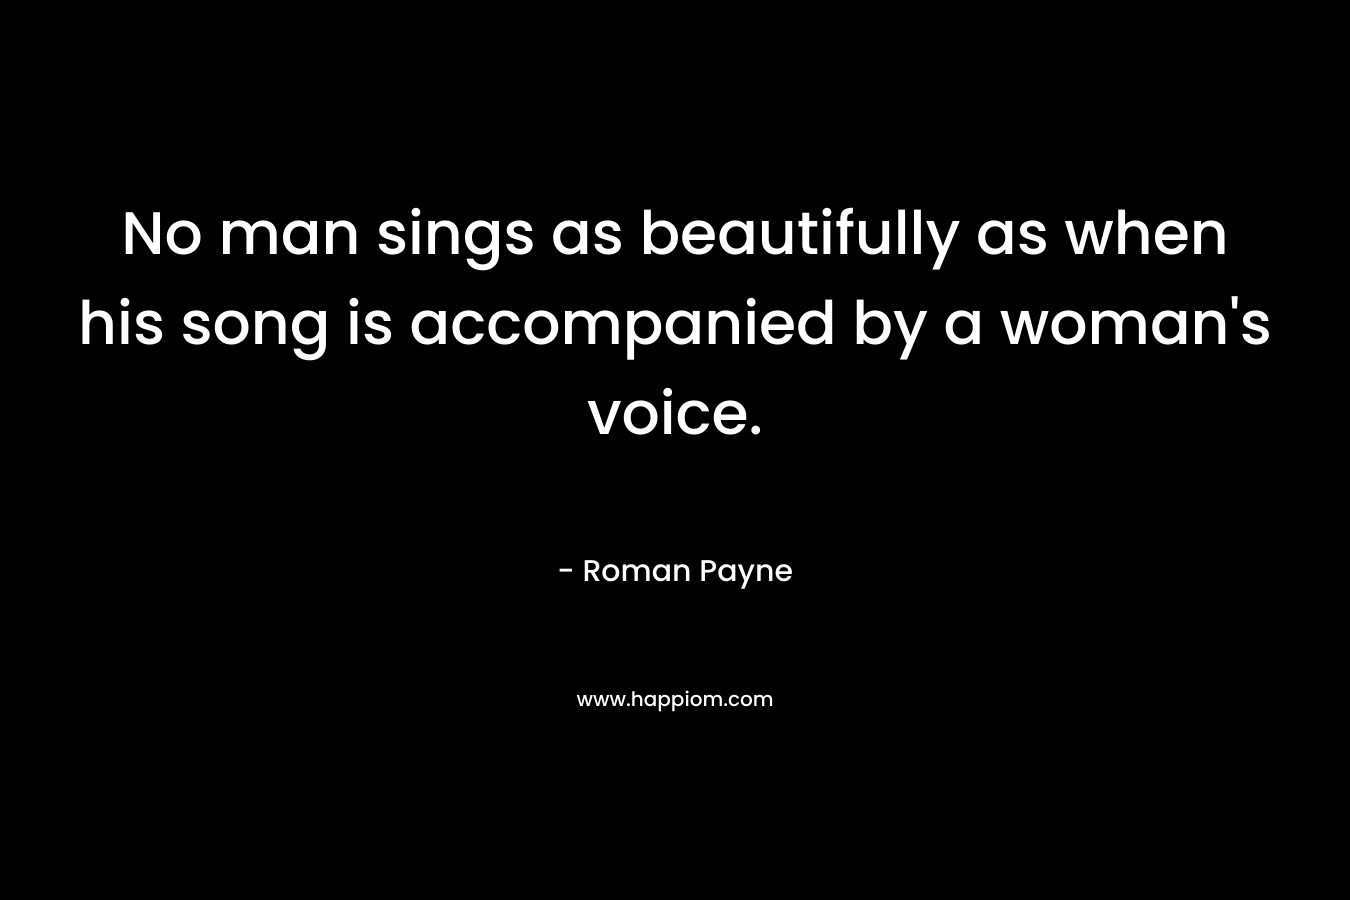 No man sings as beautifully as when his song is accompanied by a woman's voice.